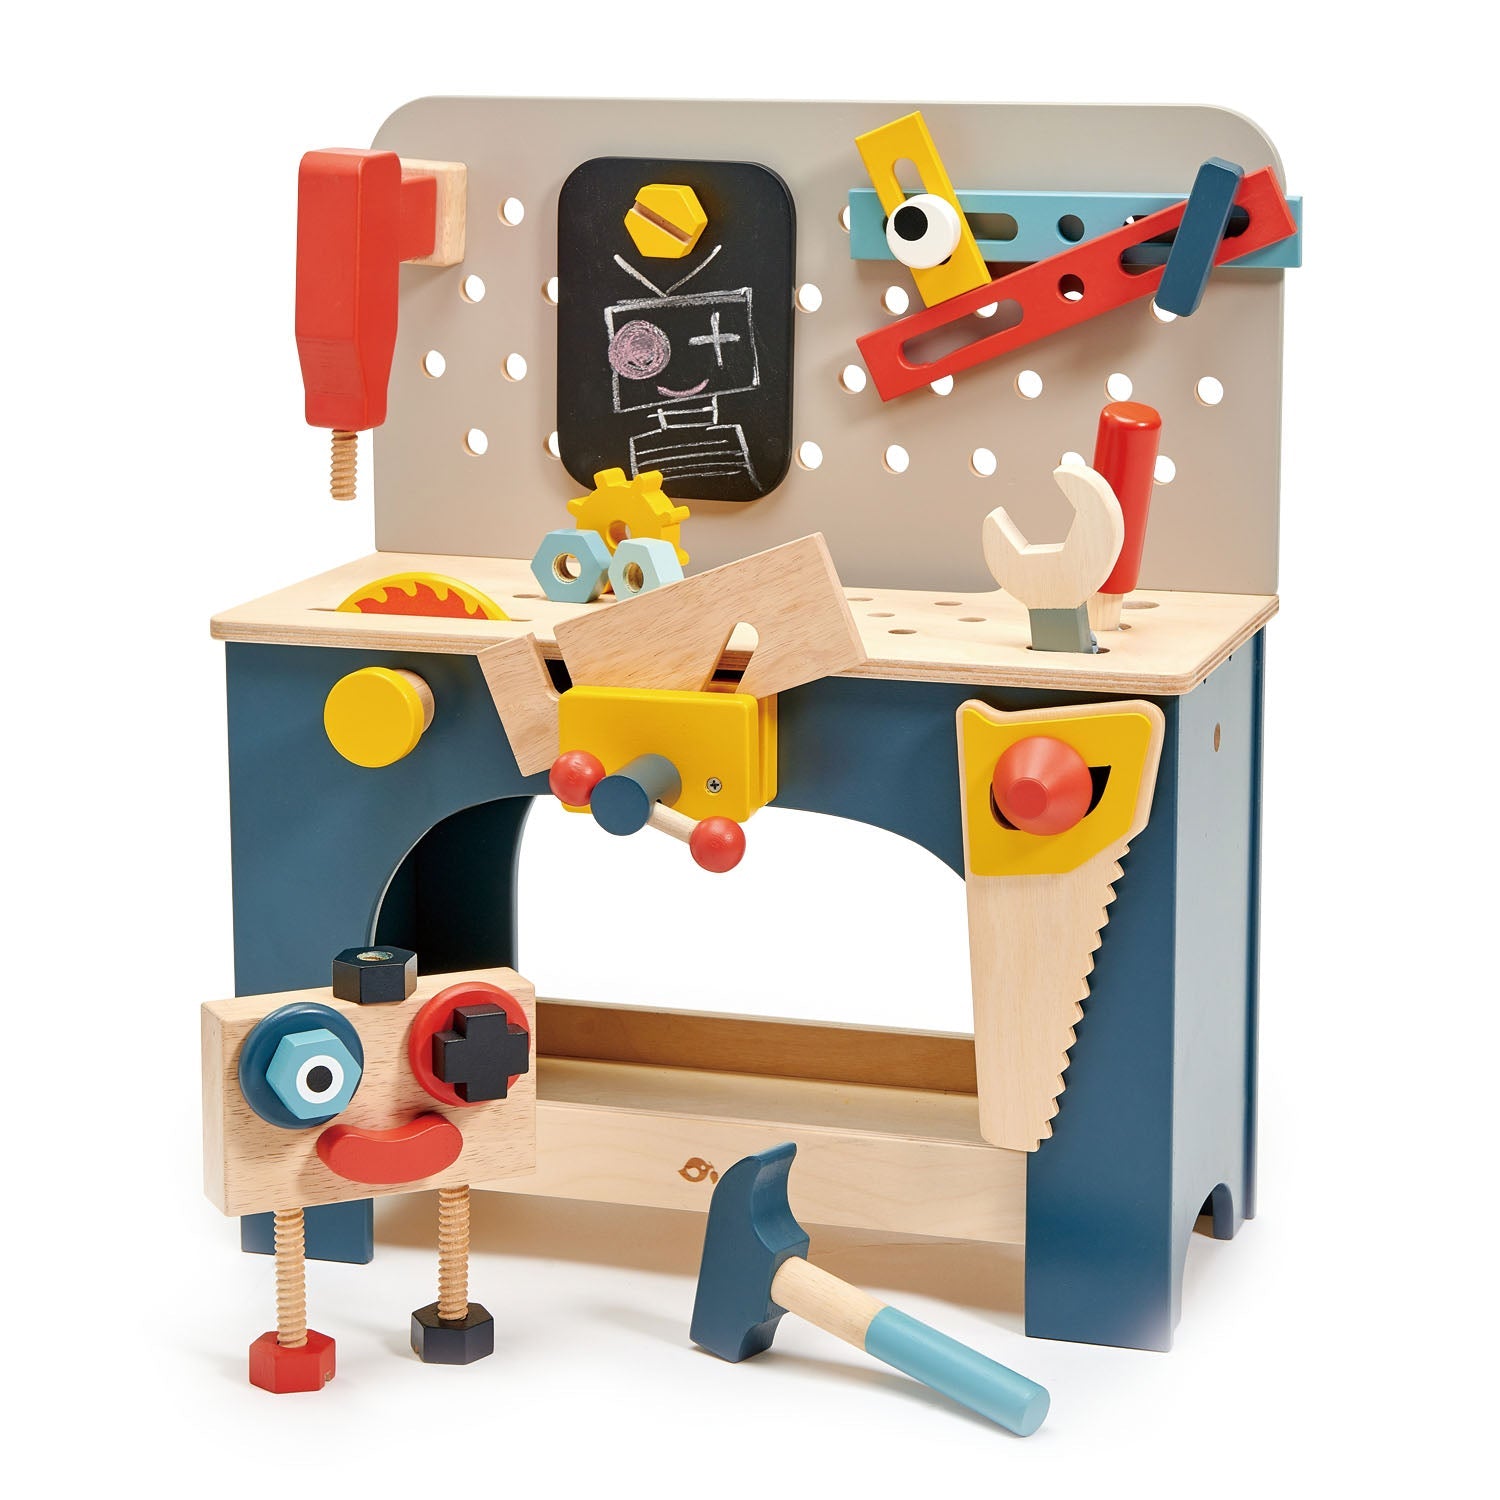 Tender Leaf Toys Table Top Tool Bench - A modern and colorful starter tool bench for toddlers, encouraging creative play and storytelling with a sturdy construction and project tray